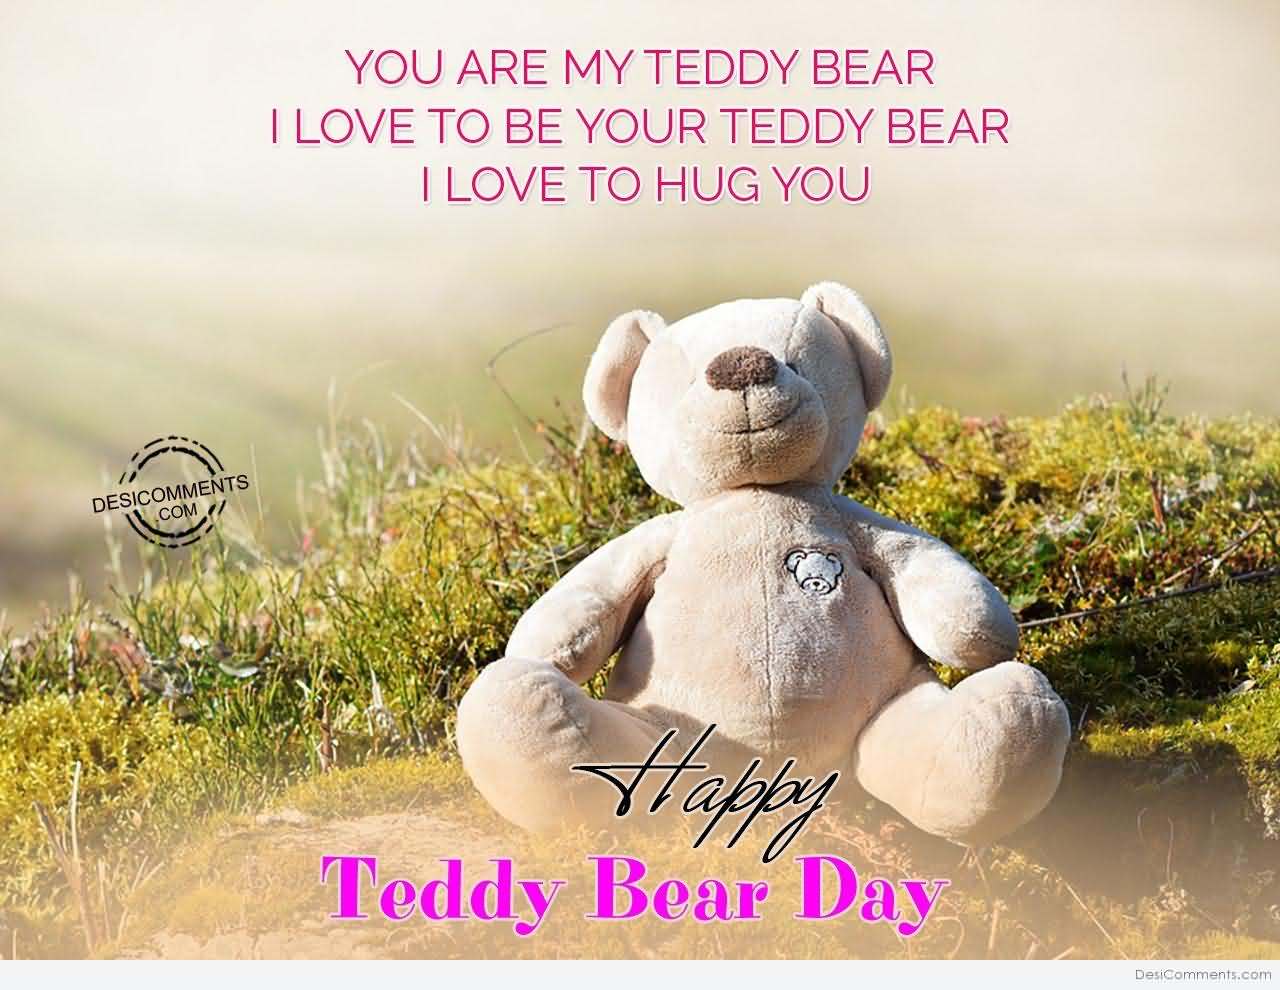 You are my teddy bear i love to be your teddy bear i love to hug you happy teddy bear day